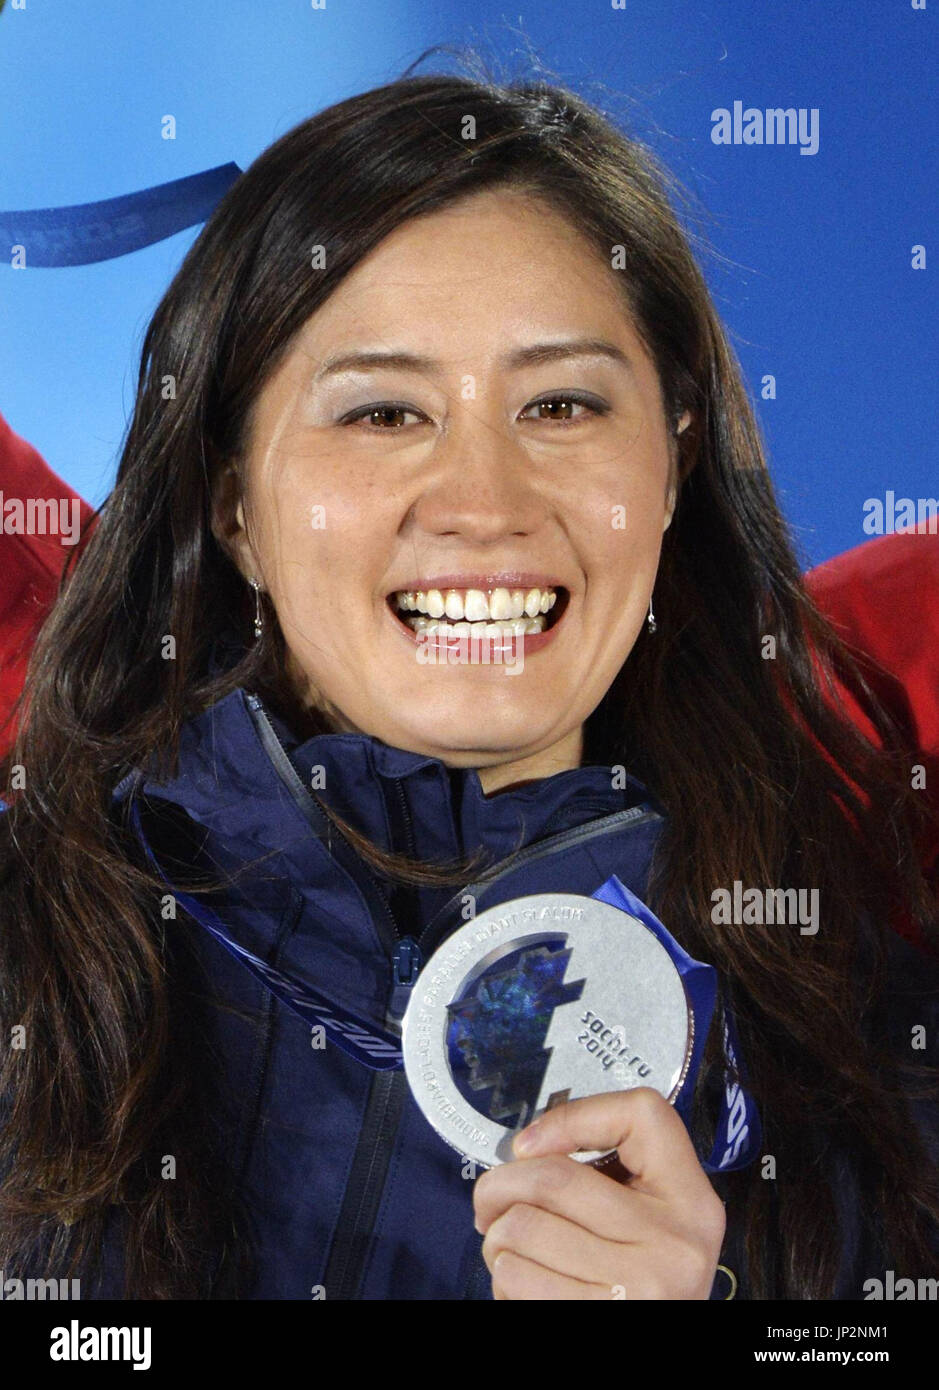 SOCHI, Russia - Tomoka Takeuchi of Japan smiles during an awards ceremony after winning the silver medal in the women's snowboard parallel giant slalom event at the Winter Olympics in Sochi, Russia, on Feb. 19, 2014. (Kyodo) Stock Photo